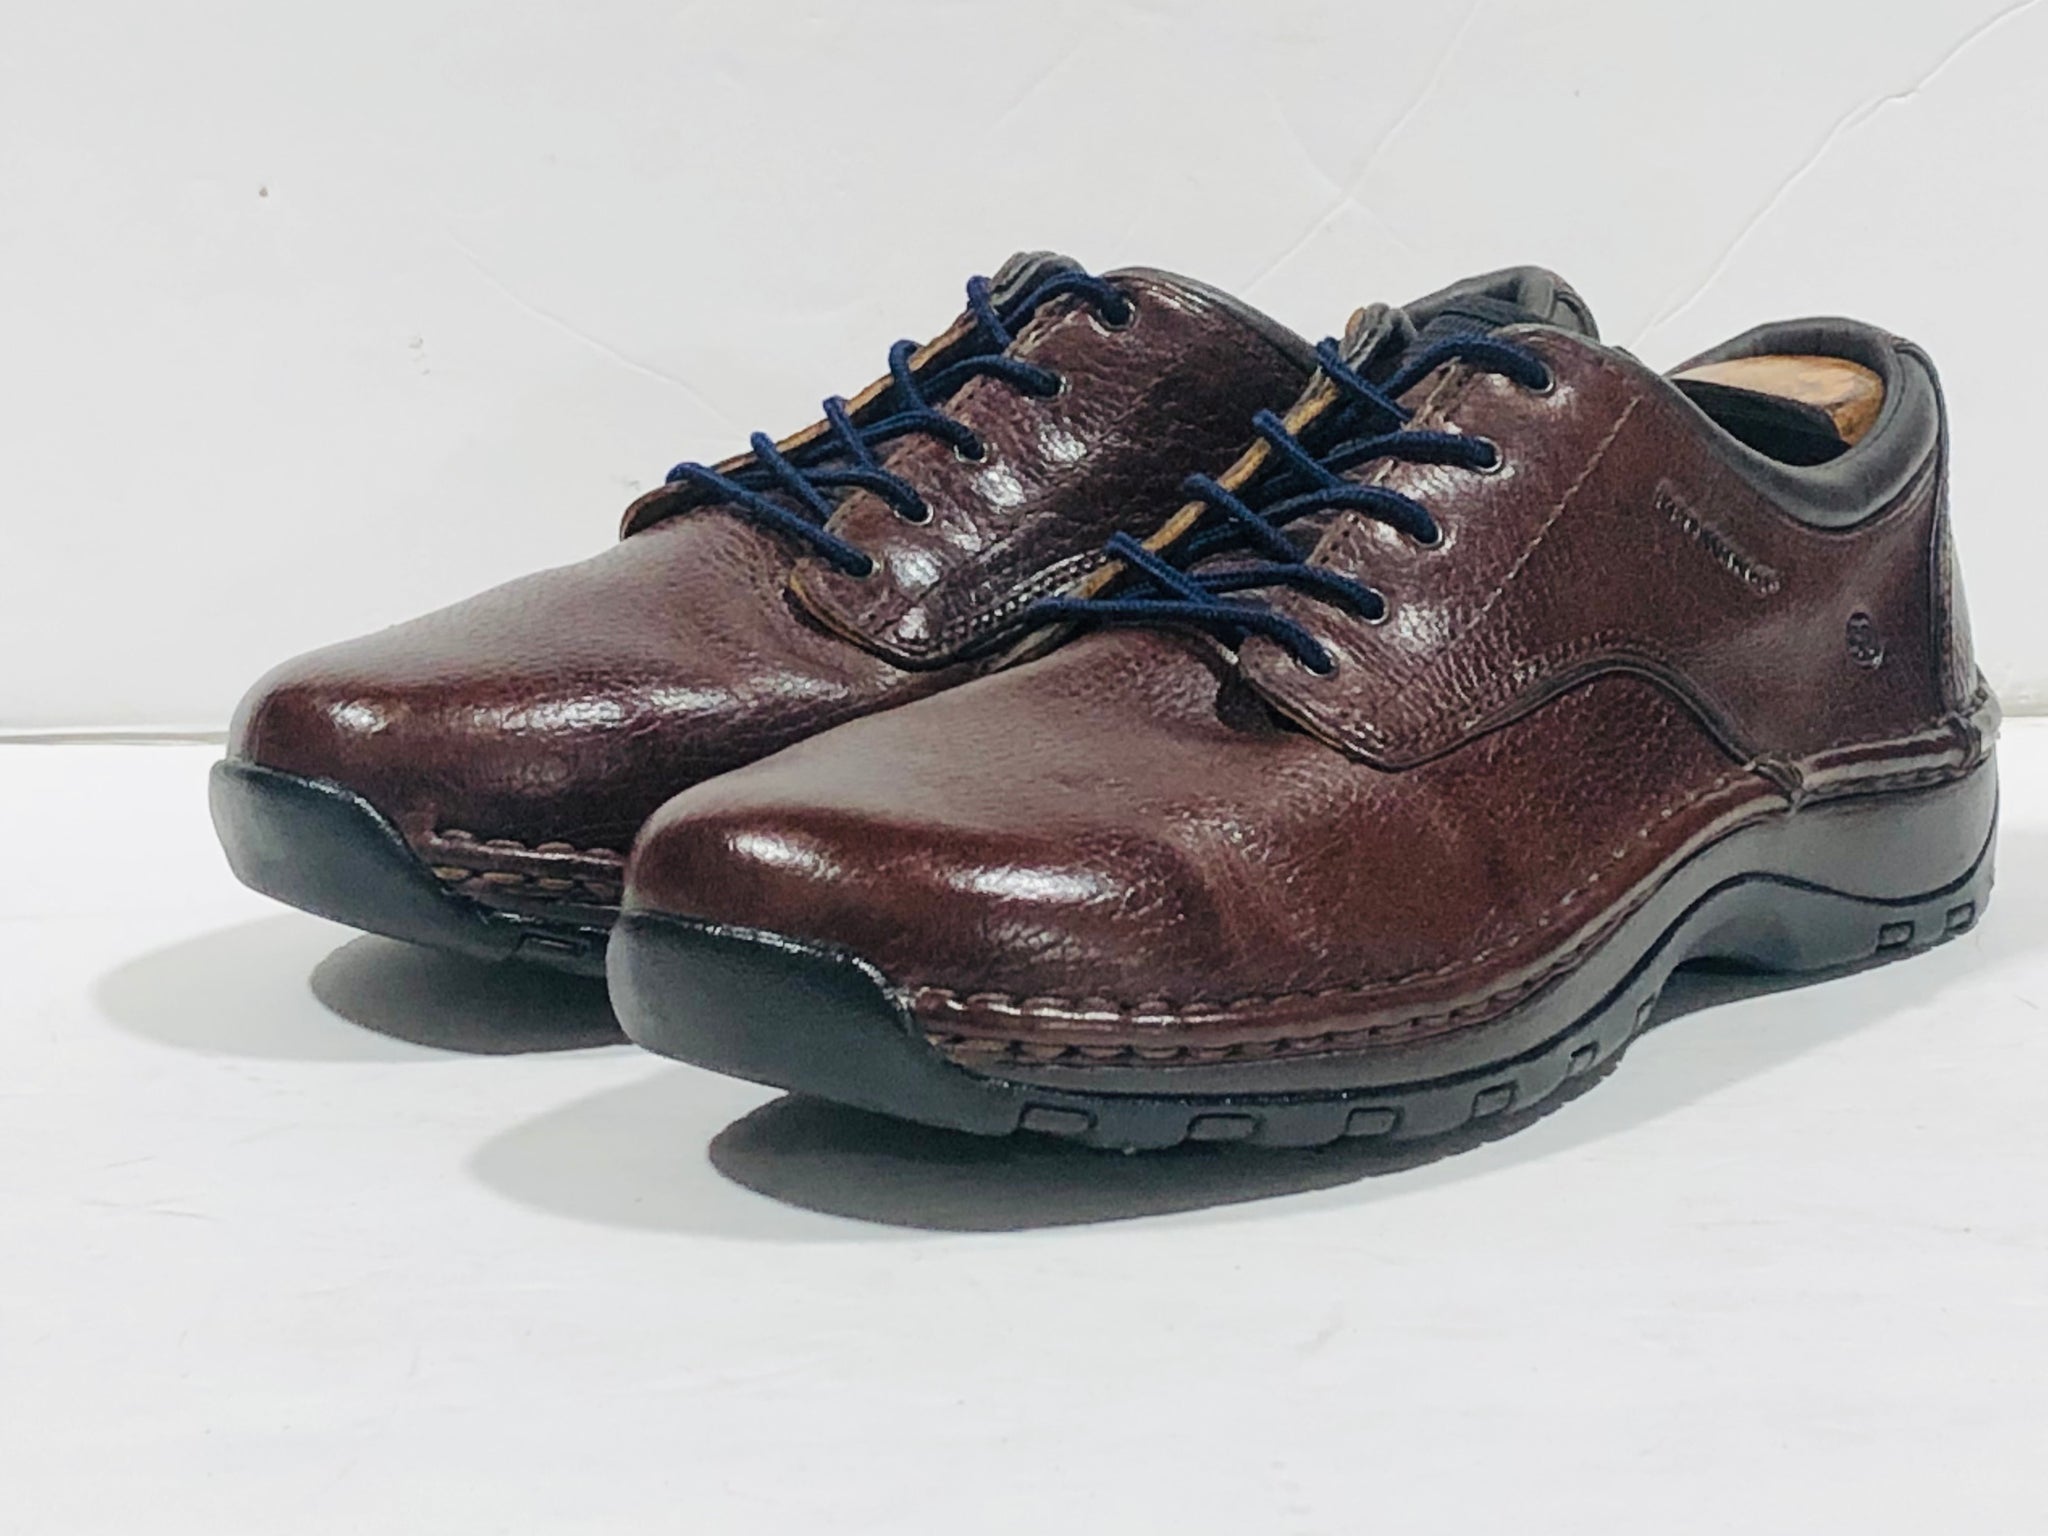 2014 Red wing shoes #8704 steel toe – Greenwich Vintage